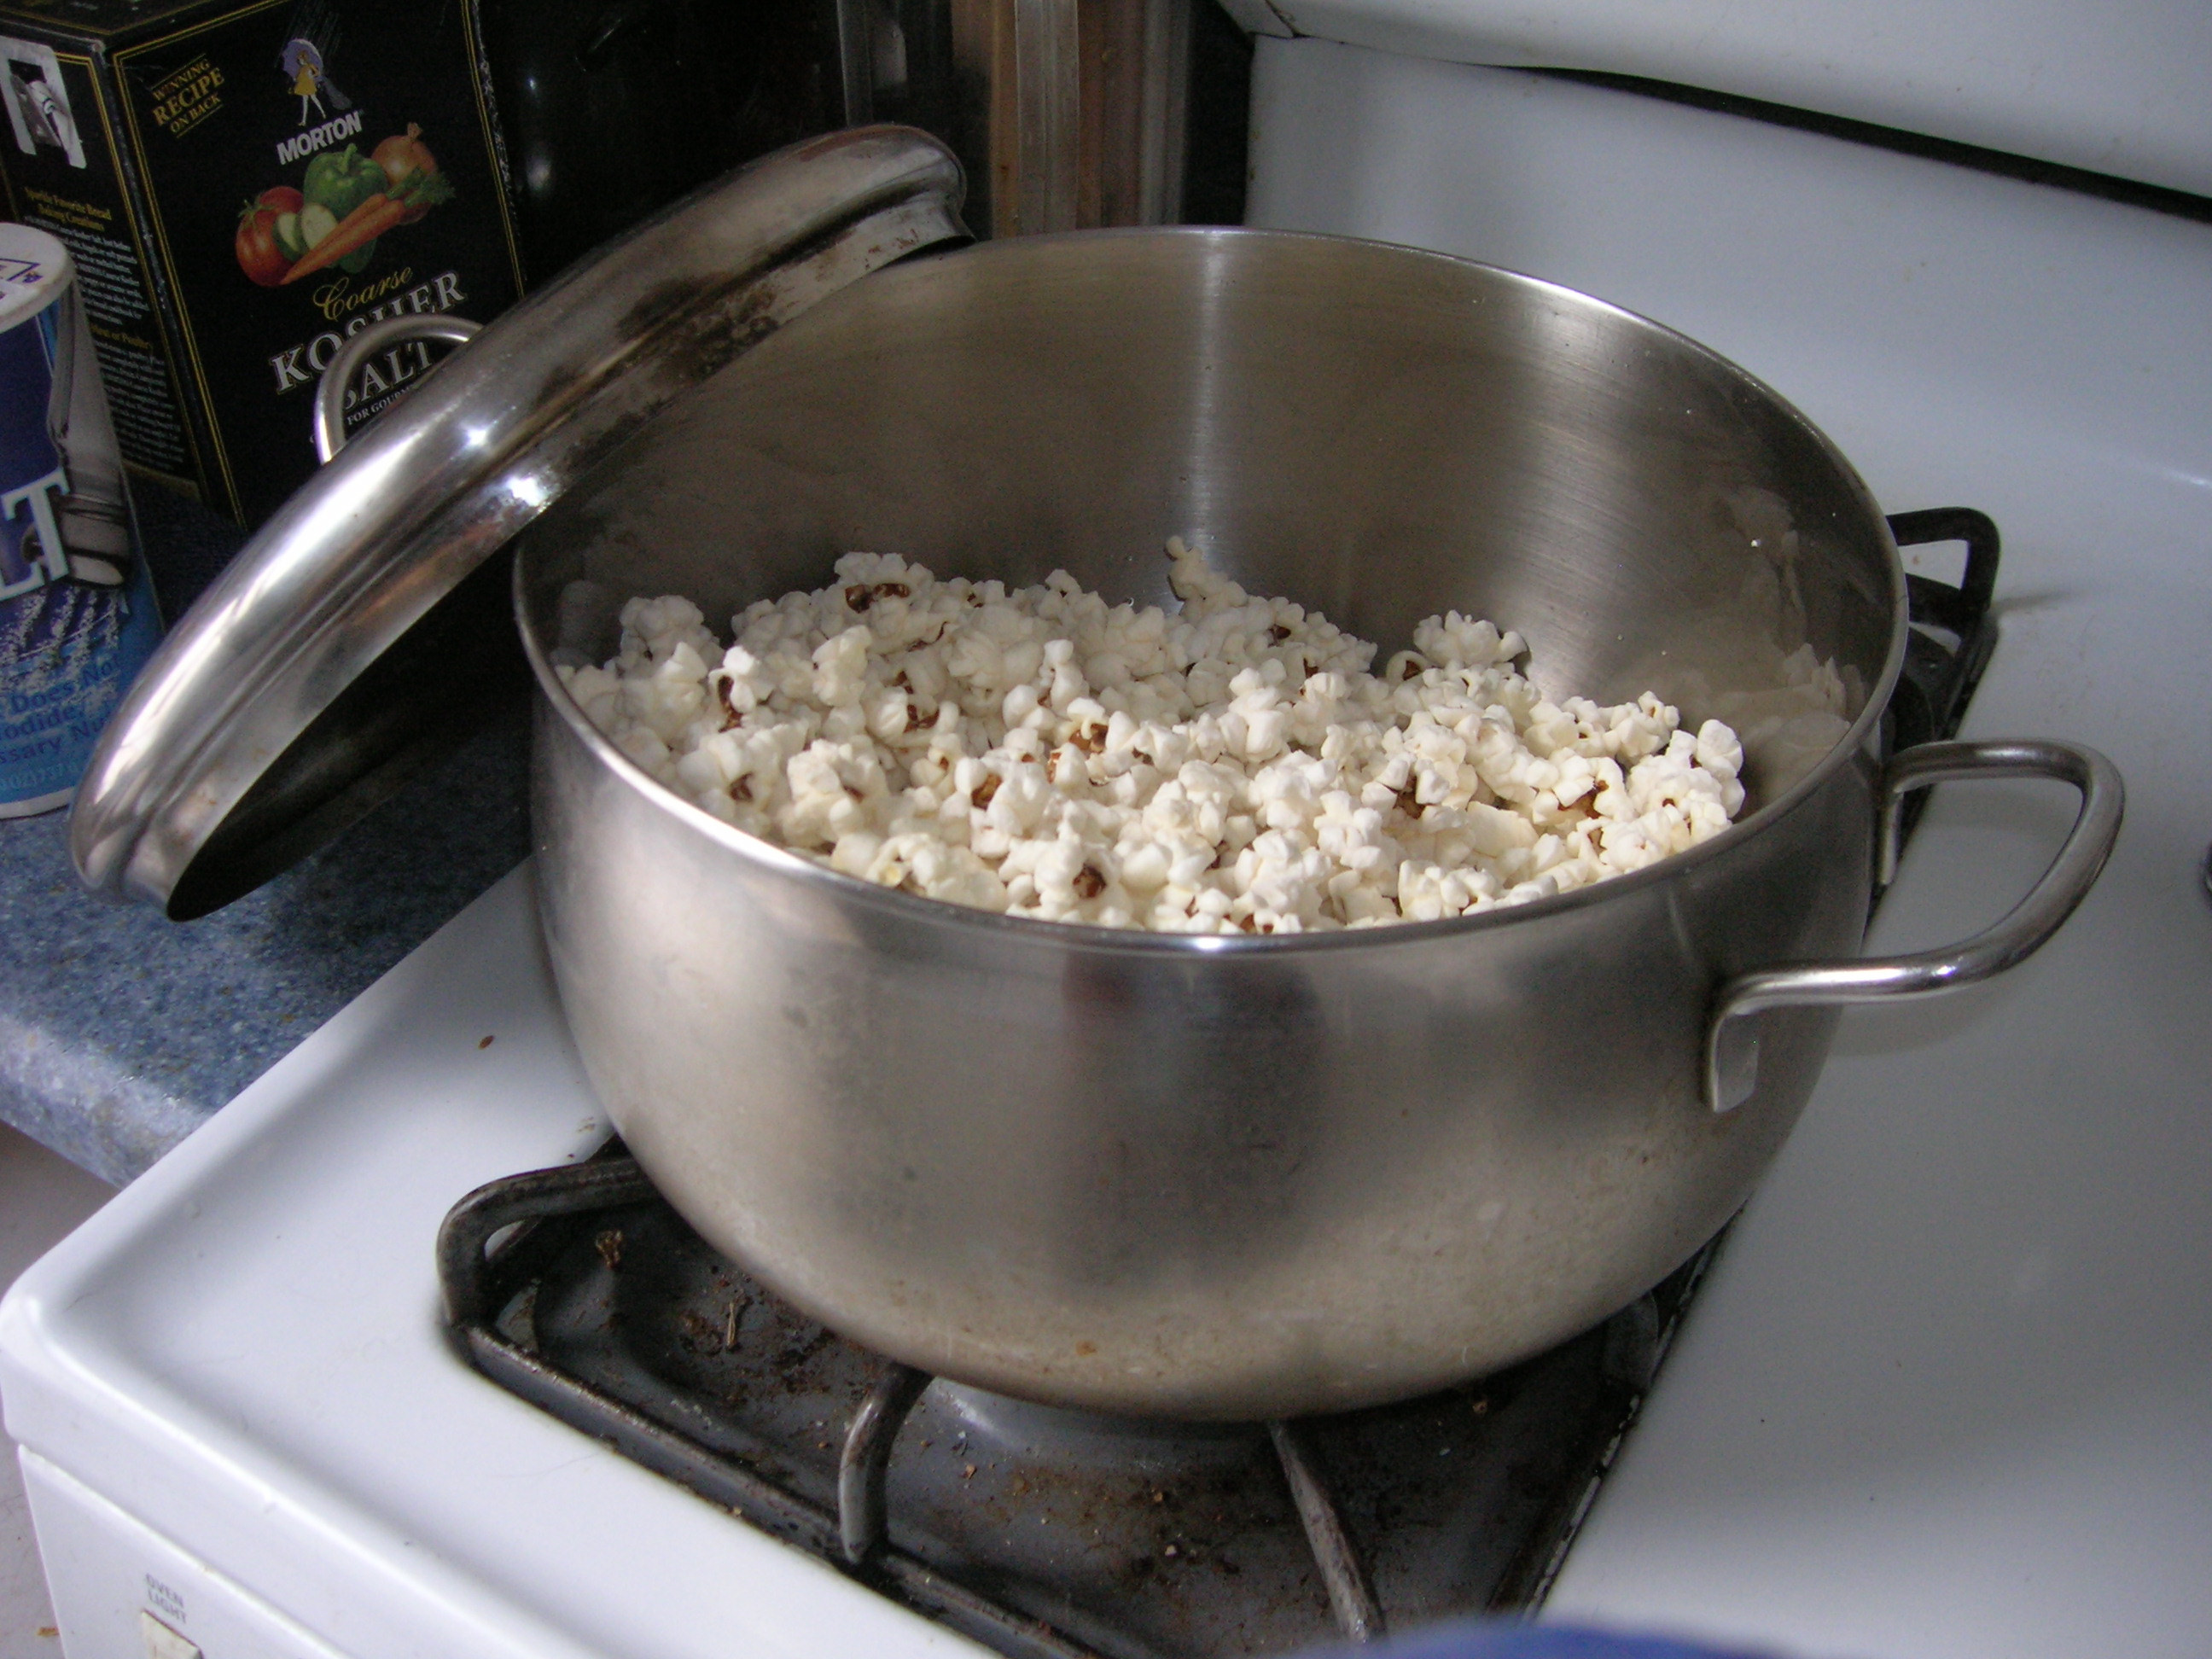 popcorn on the stove, just like Mom used to make